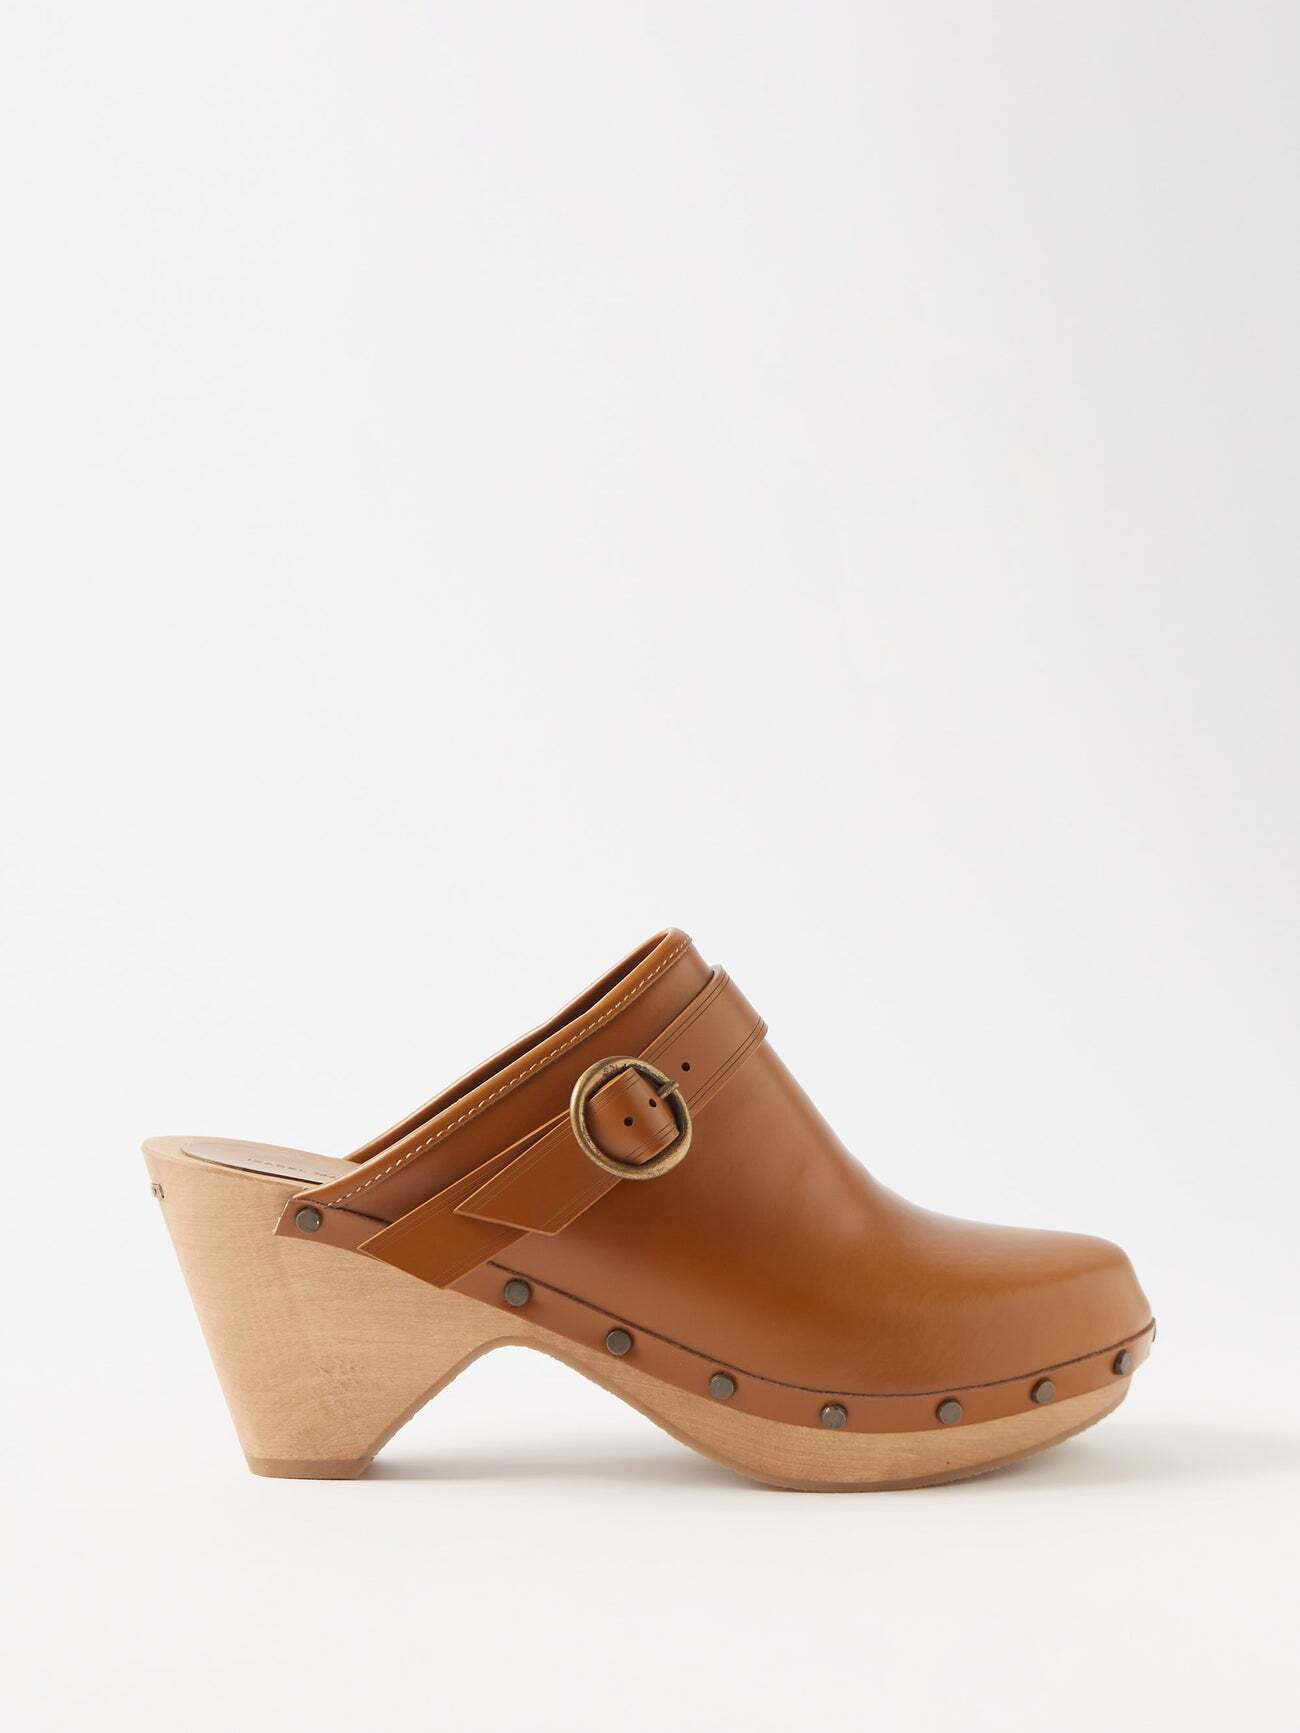 Isabel Marant - Titya 80 Buckled Leather Clogs - Womens - Brown Multi